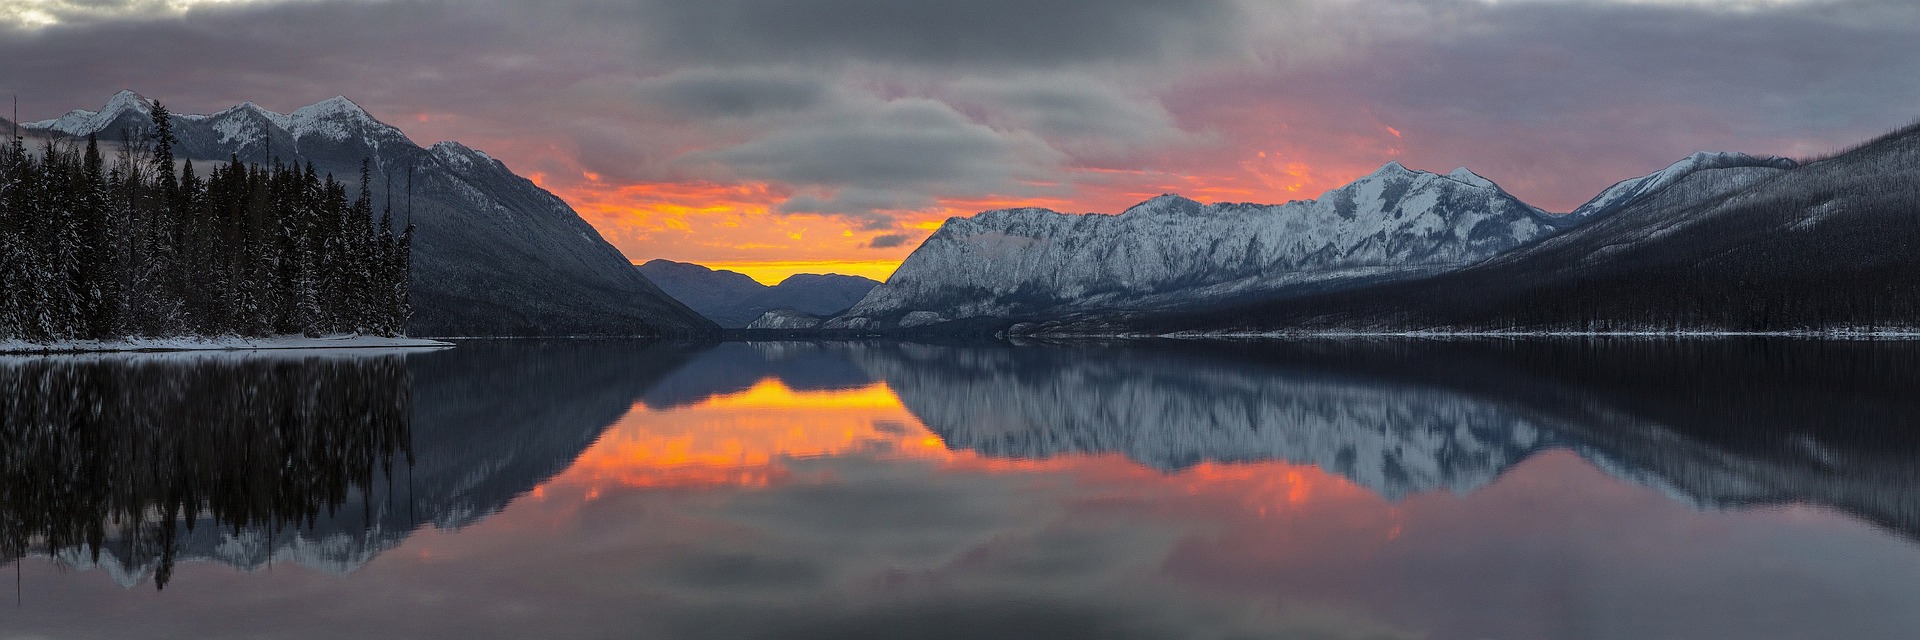 lake with sunrise, sunrise also reflected in lake mountains meet the lake red, yellow and gray hues